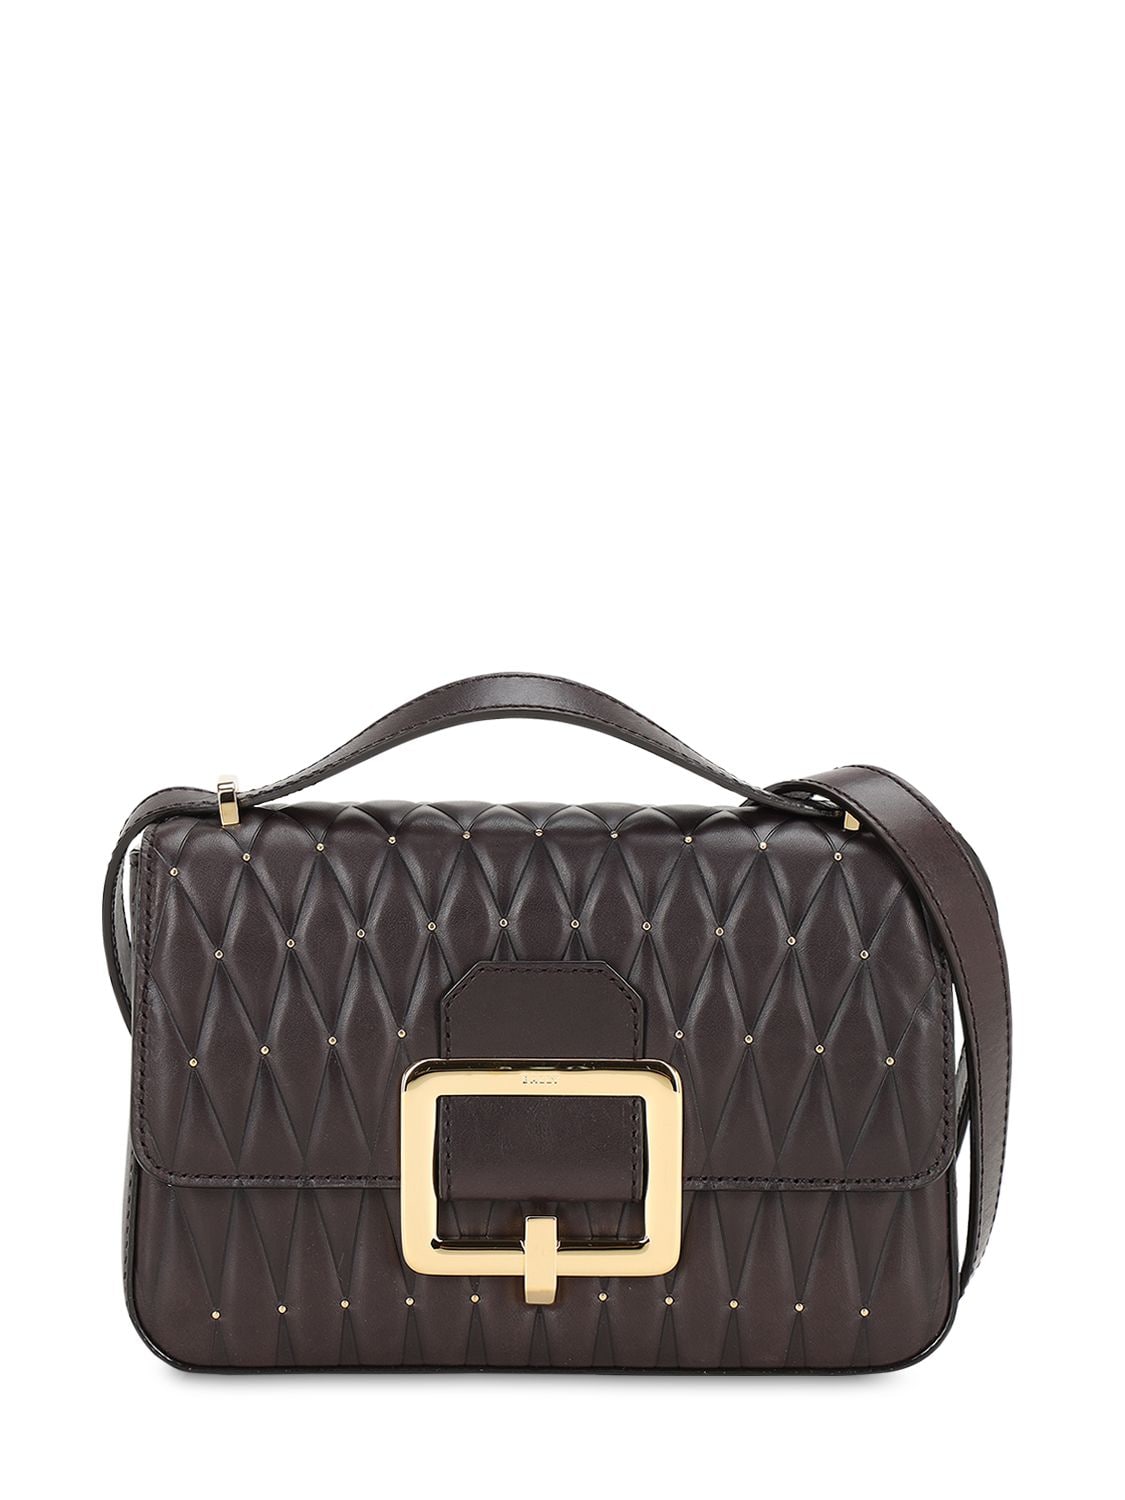 Bally Janelle Quilted Leather Bag W/studs In Prugna